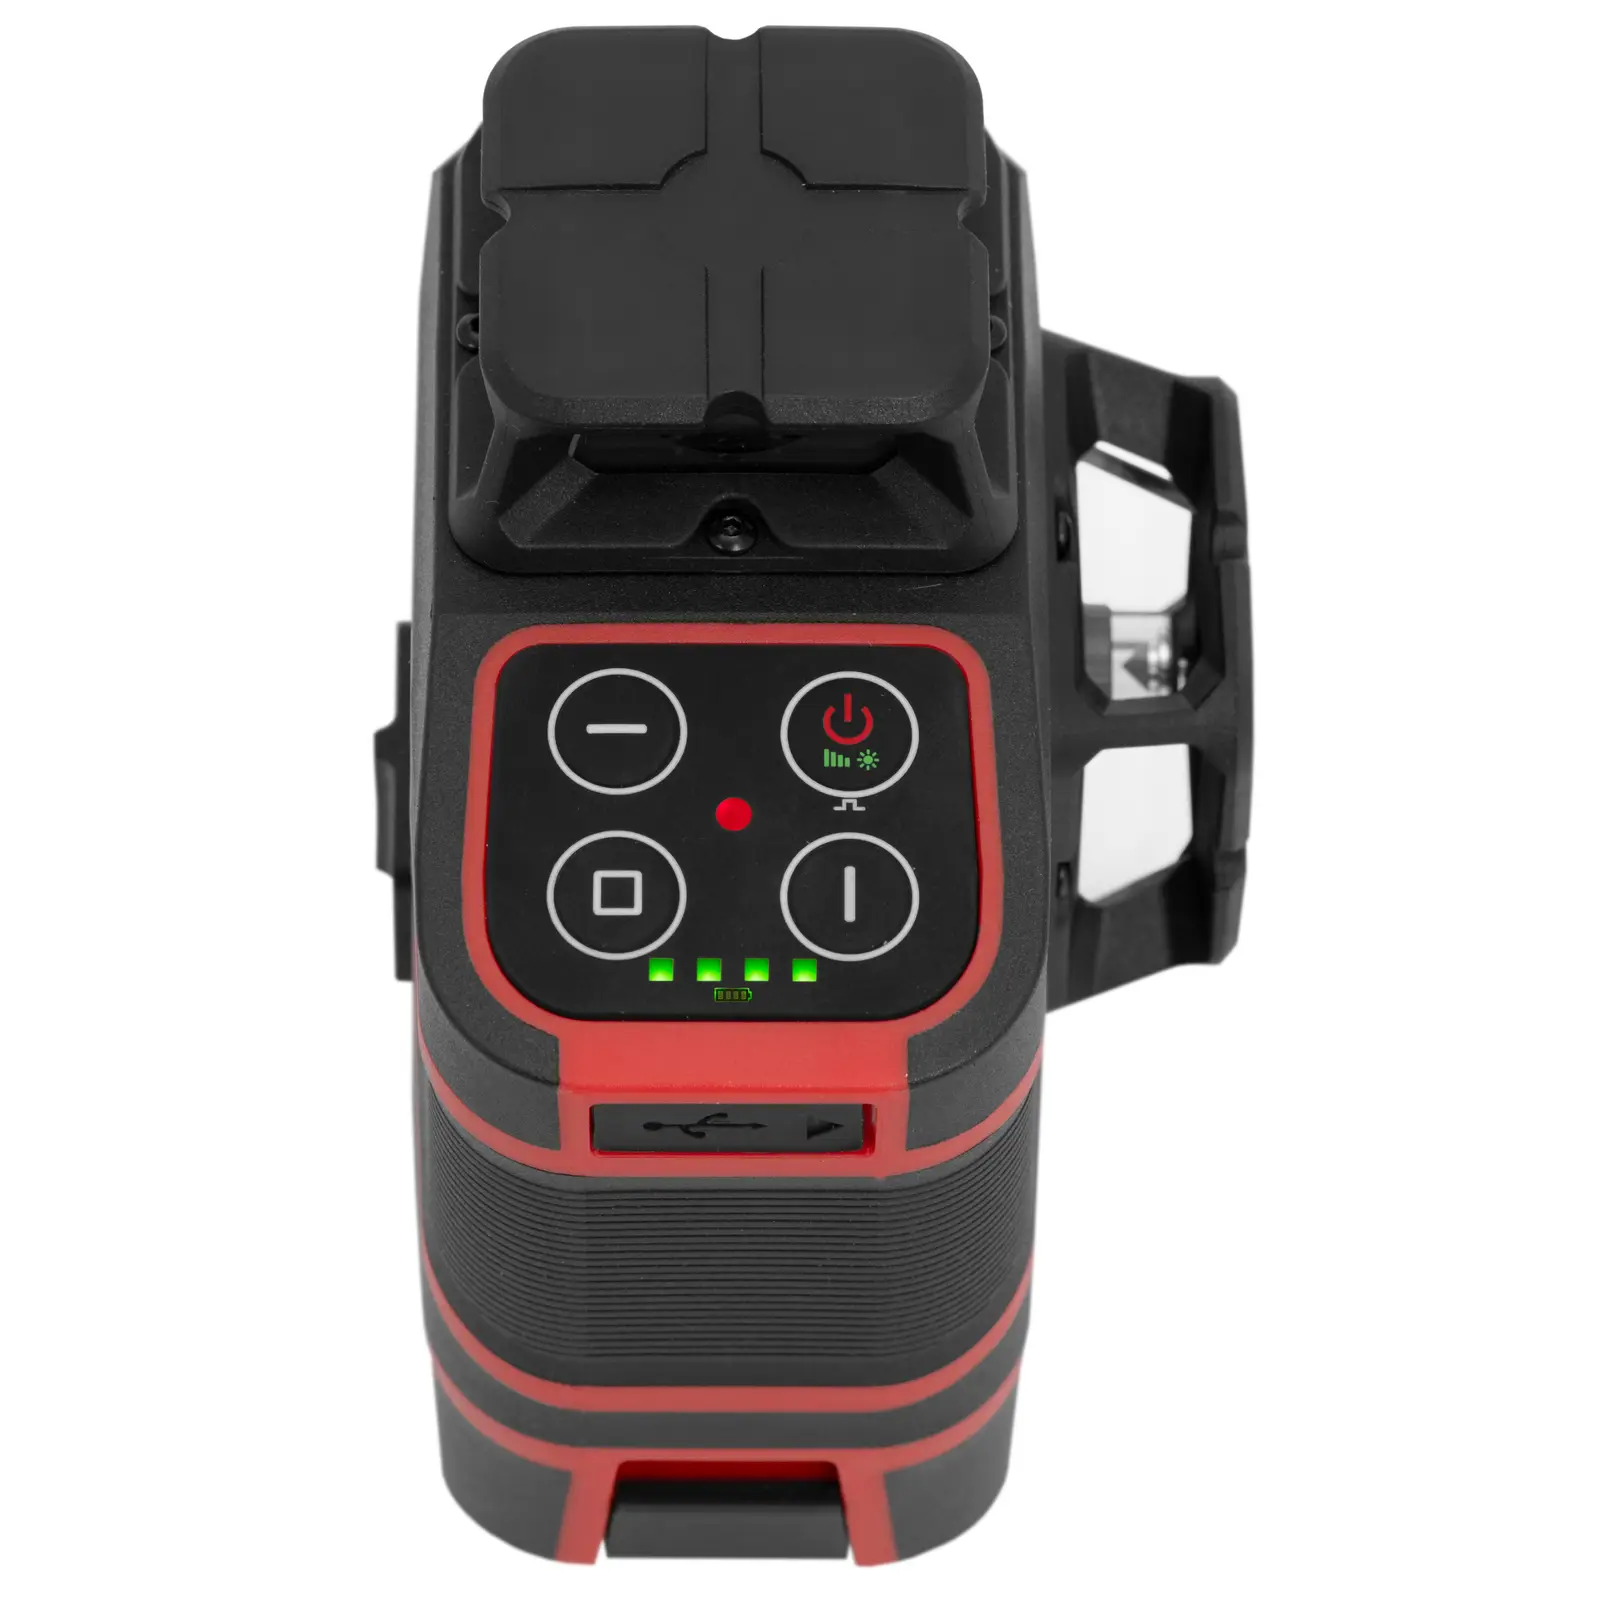 360° Cross Line Laser Level with Carrying Case - 30 m - self-levelling - remote control